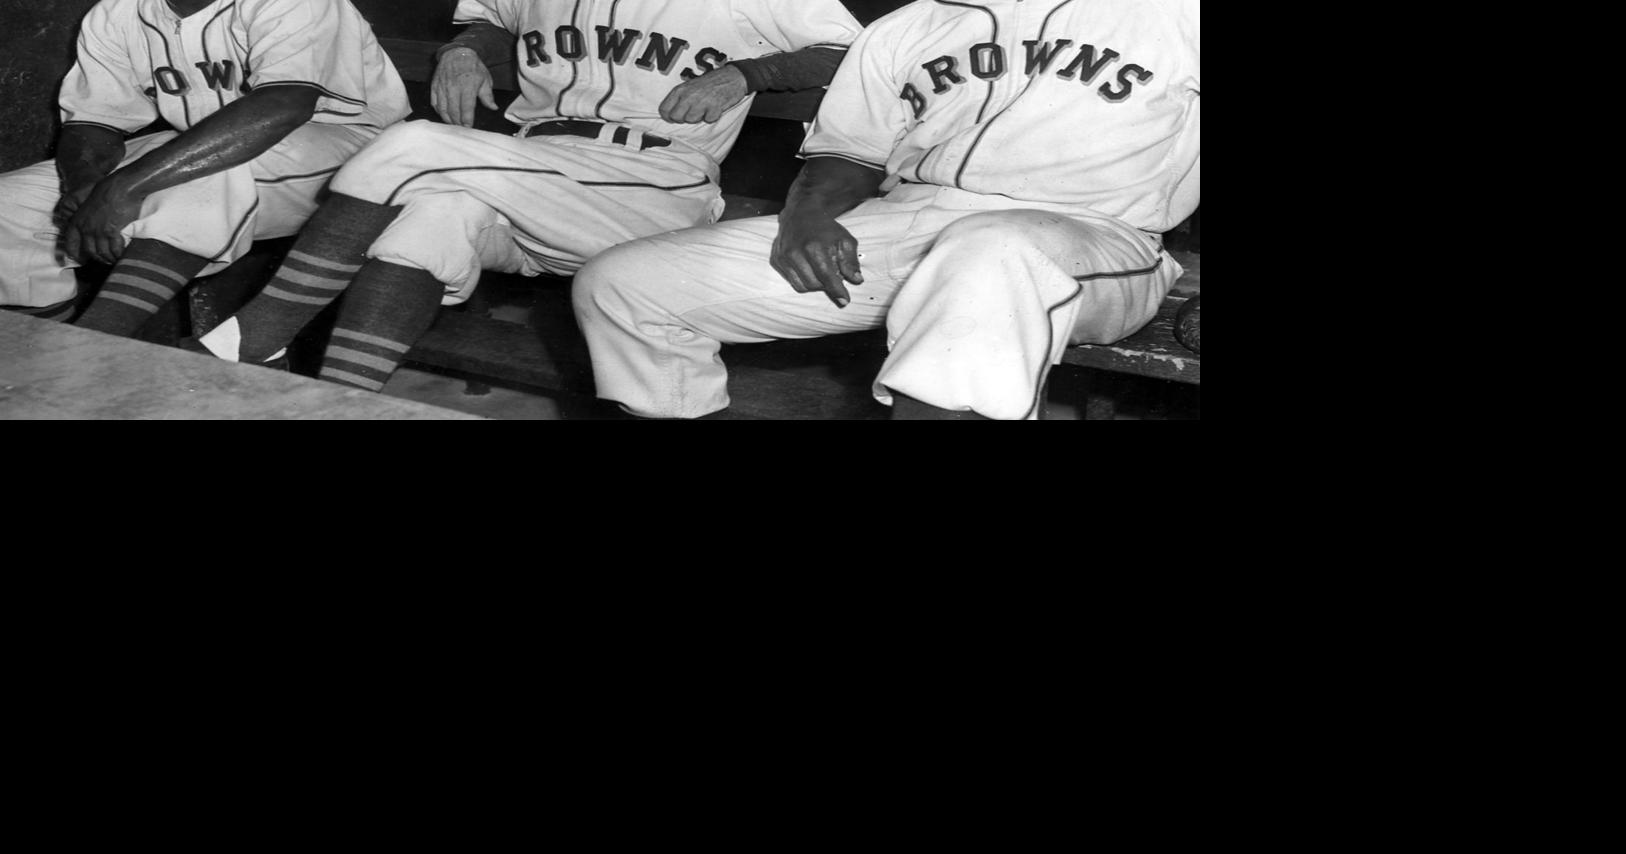 St. Louis Browns. Before they wore red, they were brown.